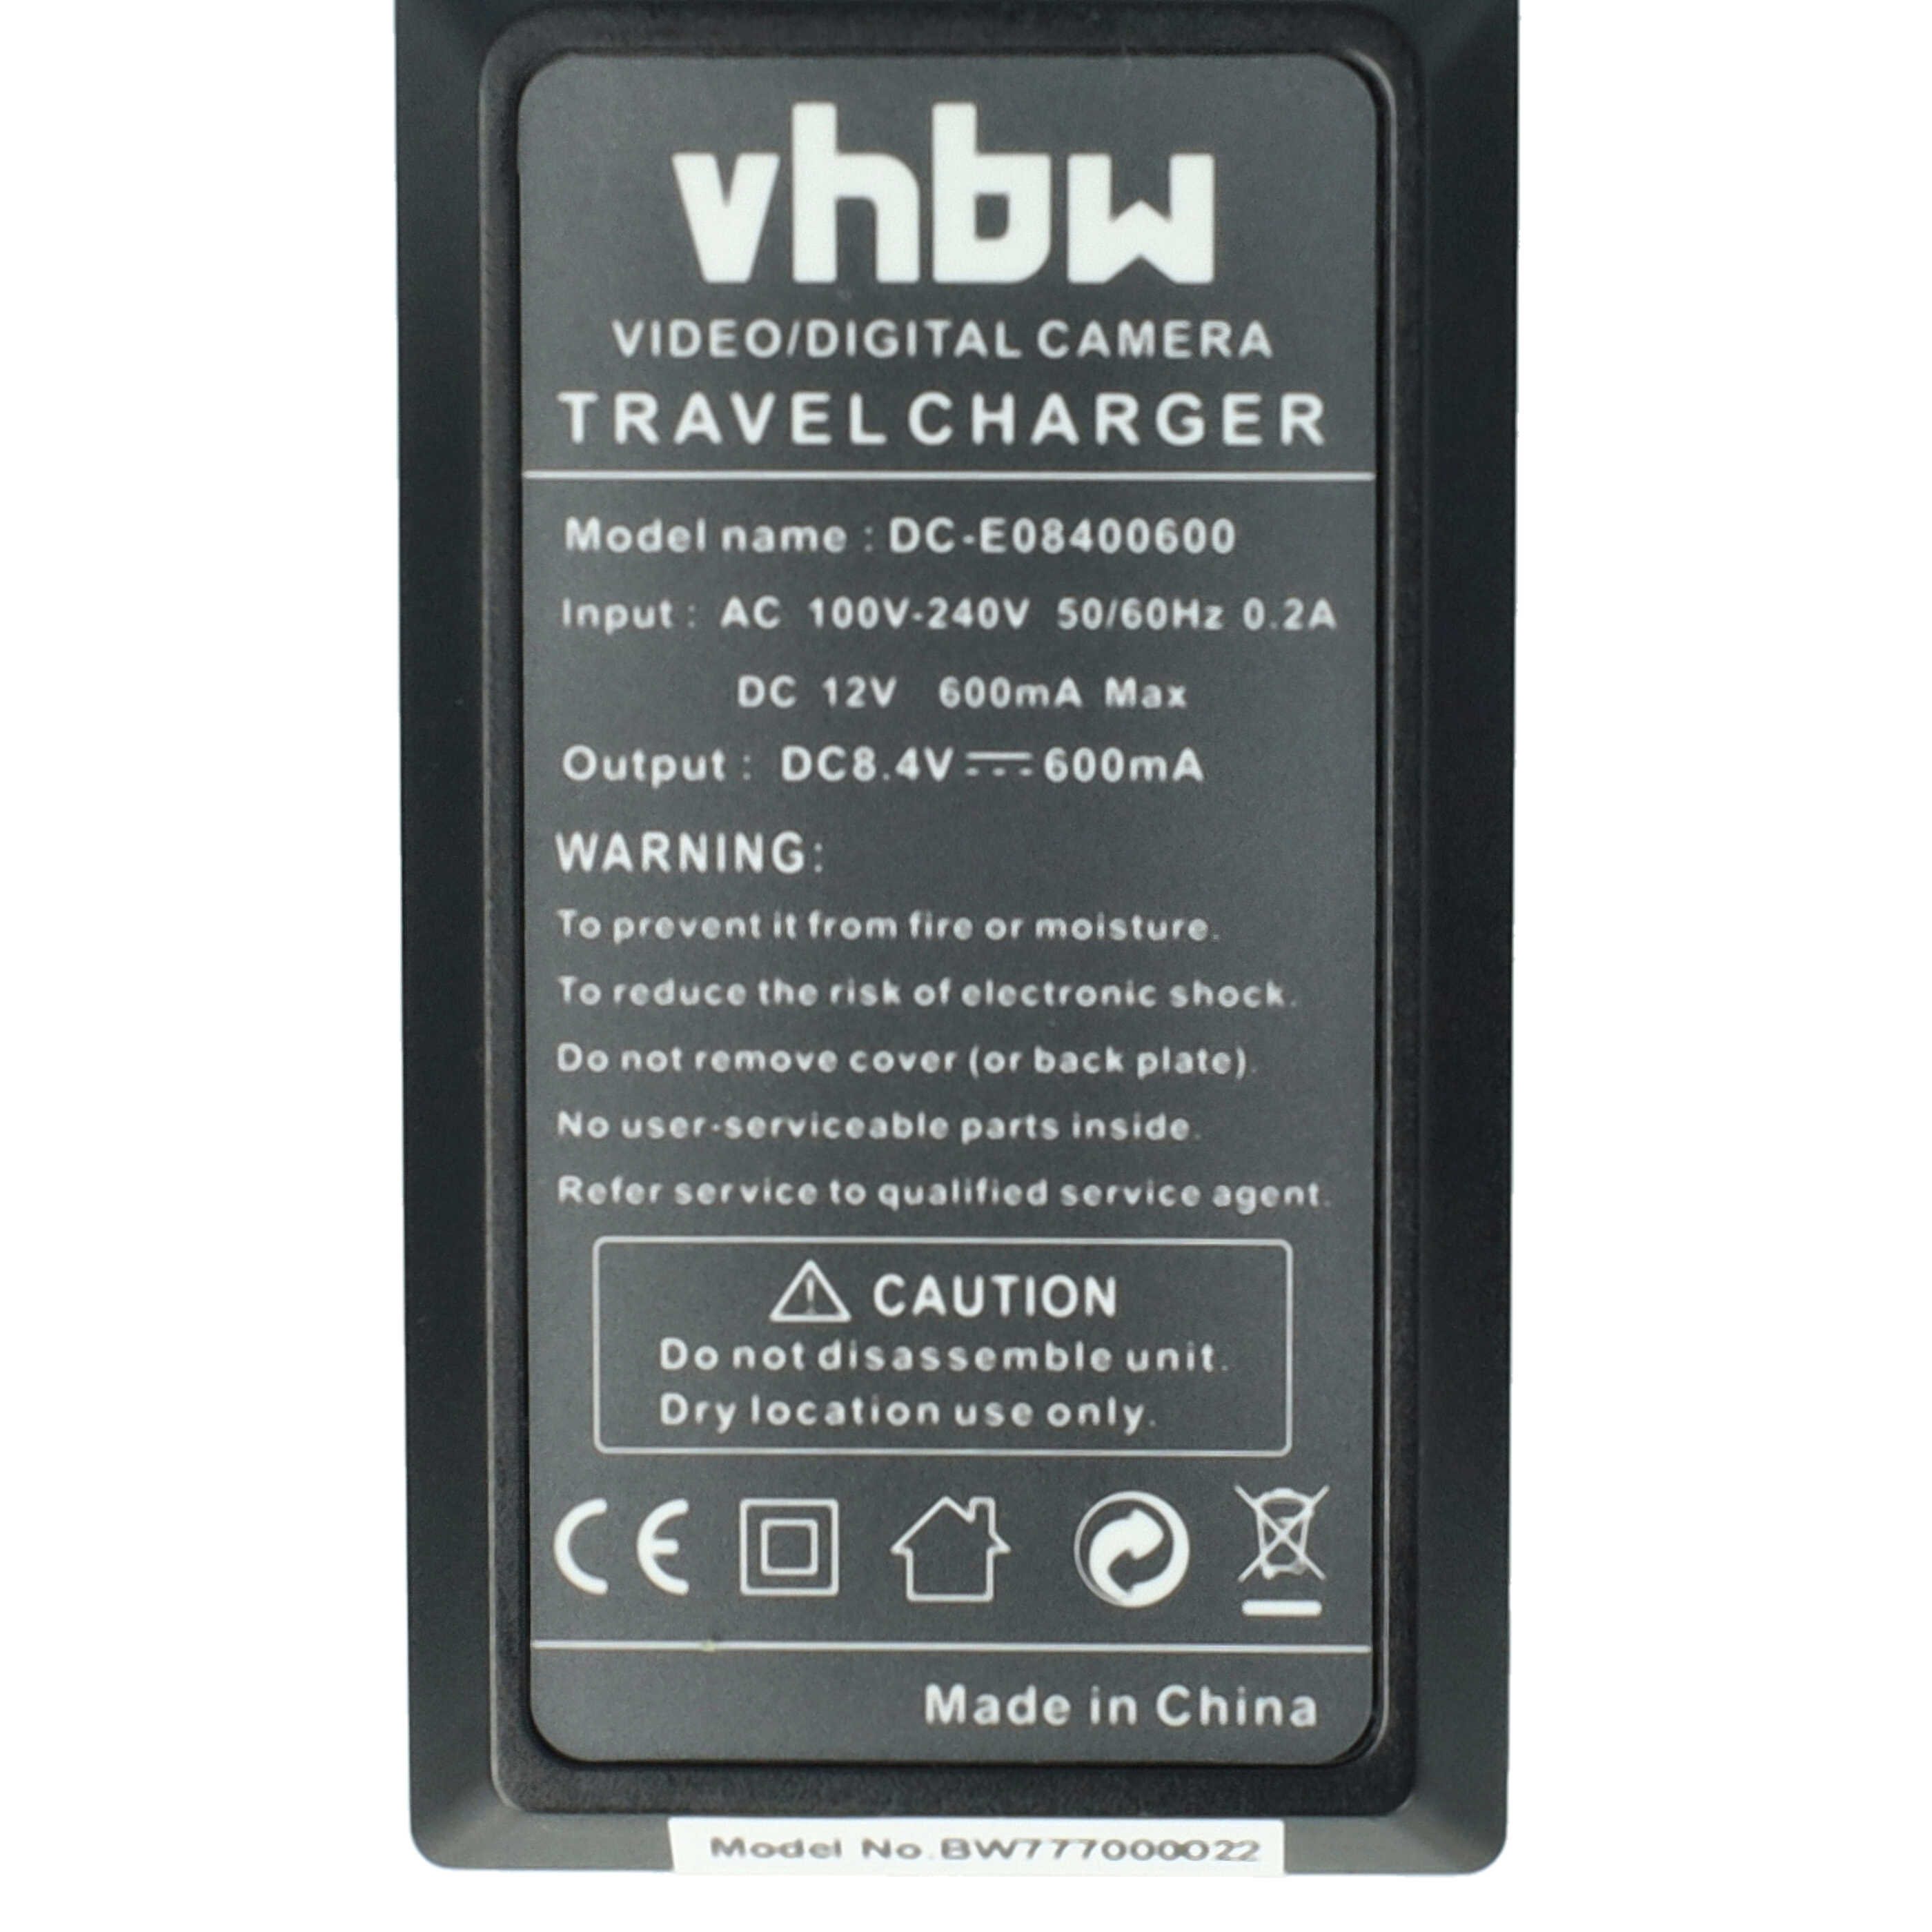 Battery Charger suitable for Olympus PSBLS1 Camera etc. - 0.6 A, 8.4 V